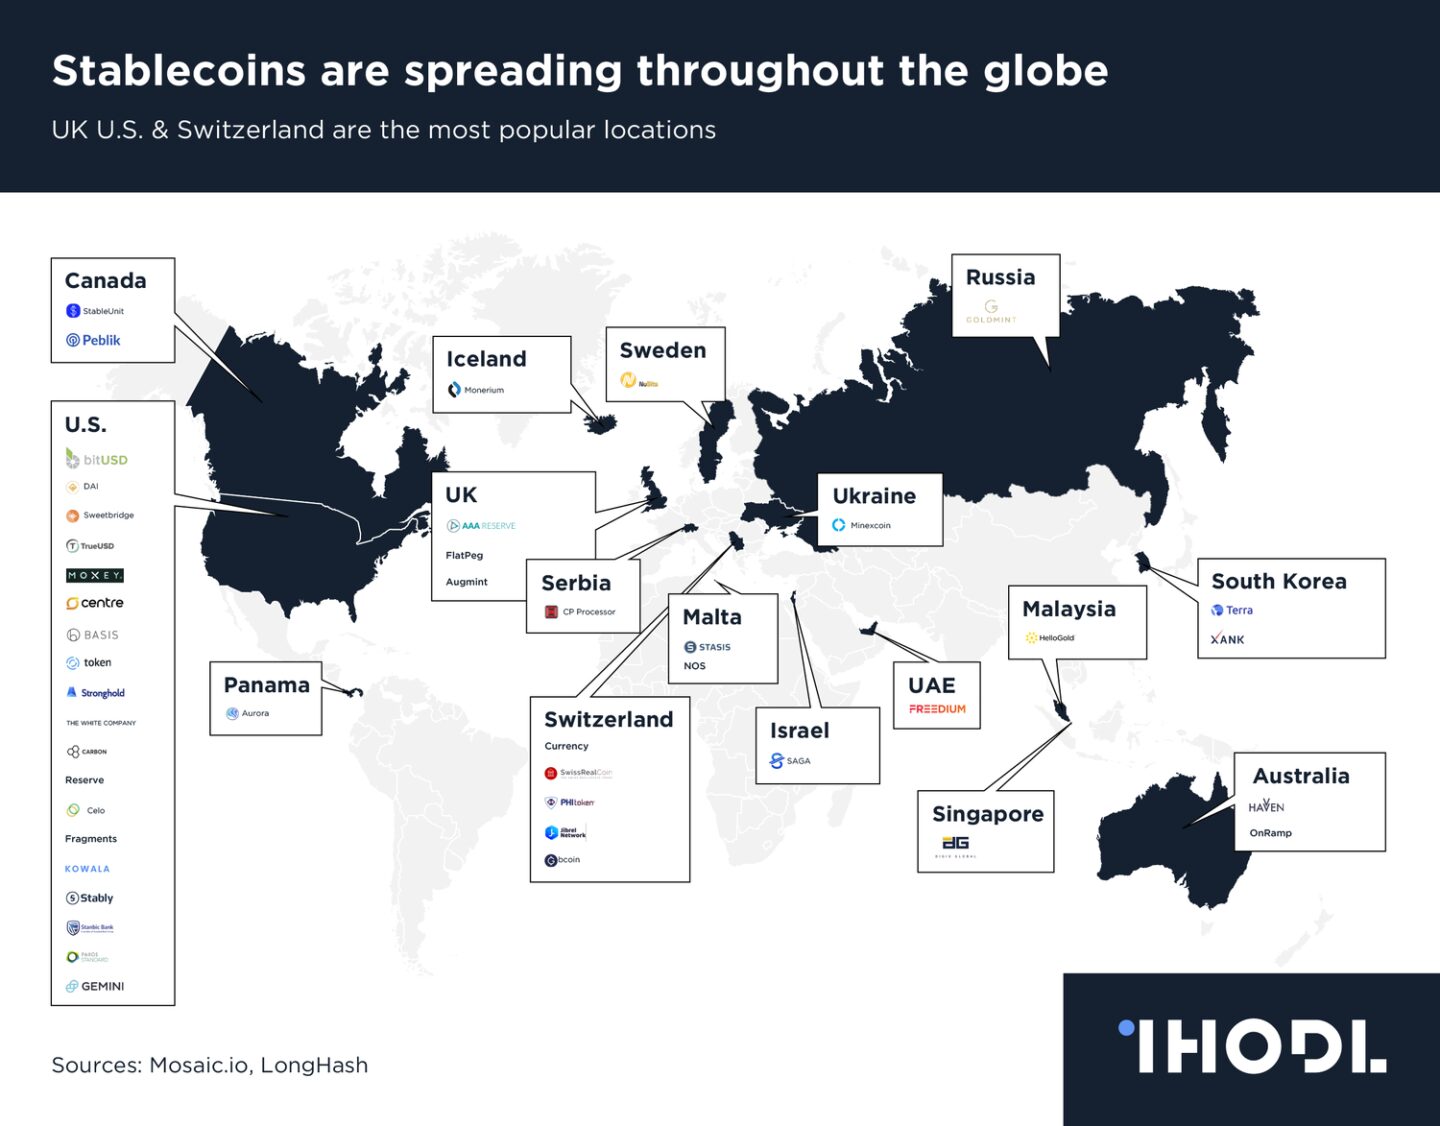 https://ihodl.com/infographics/2018-10-29/chart-day-stablecoins-are-spreading-throughout-globe/